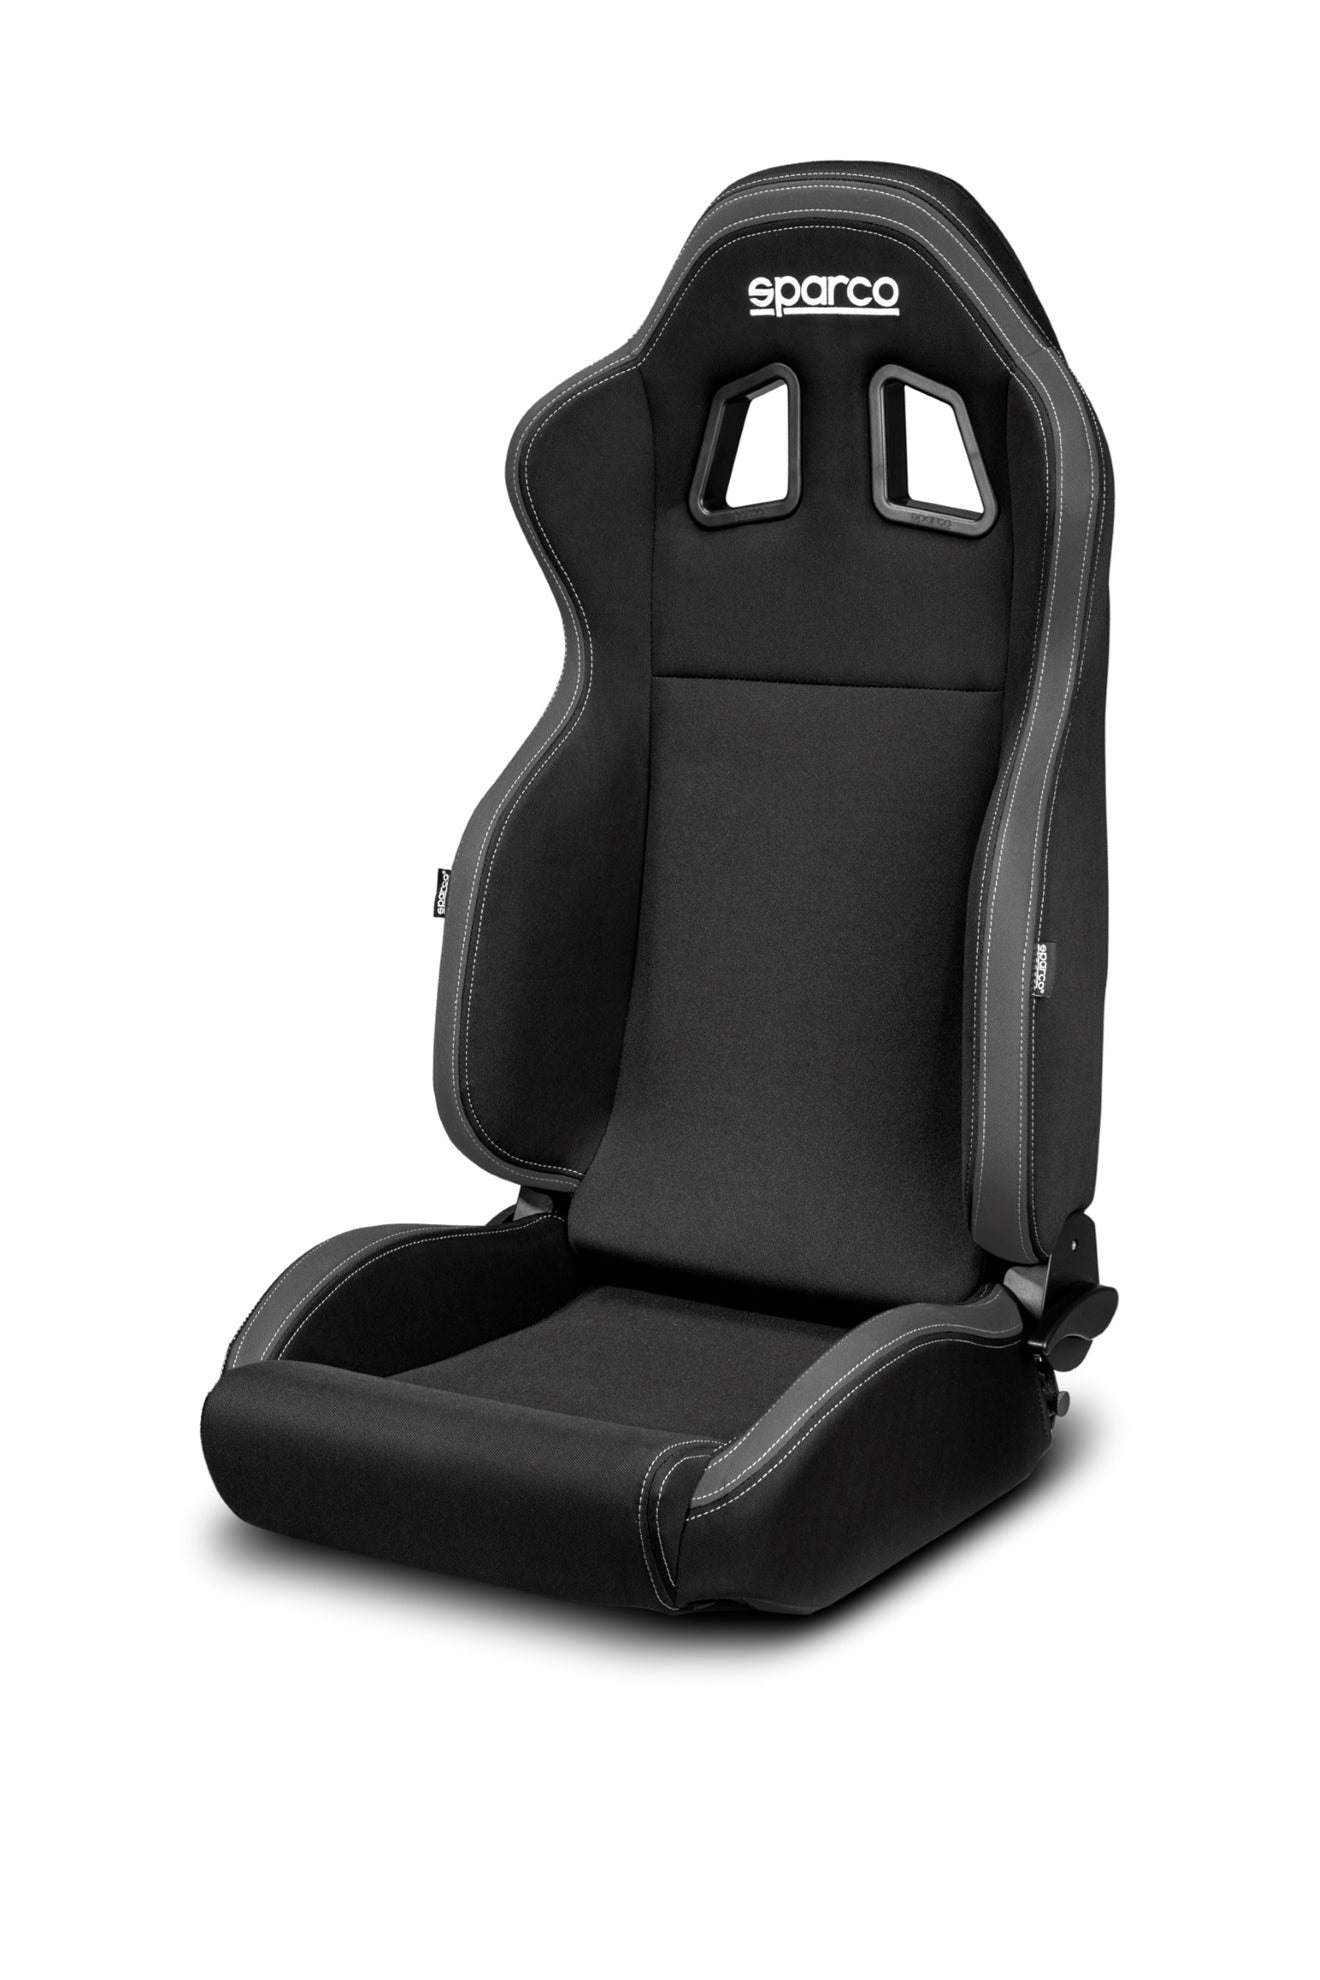 Sparco R100 Reclinable Steel Model Seat Black/Gray - Universal - Dirty Racing Products